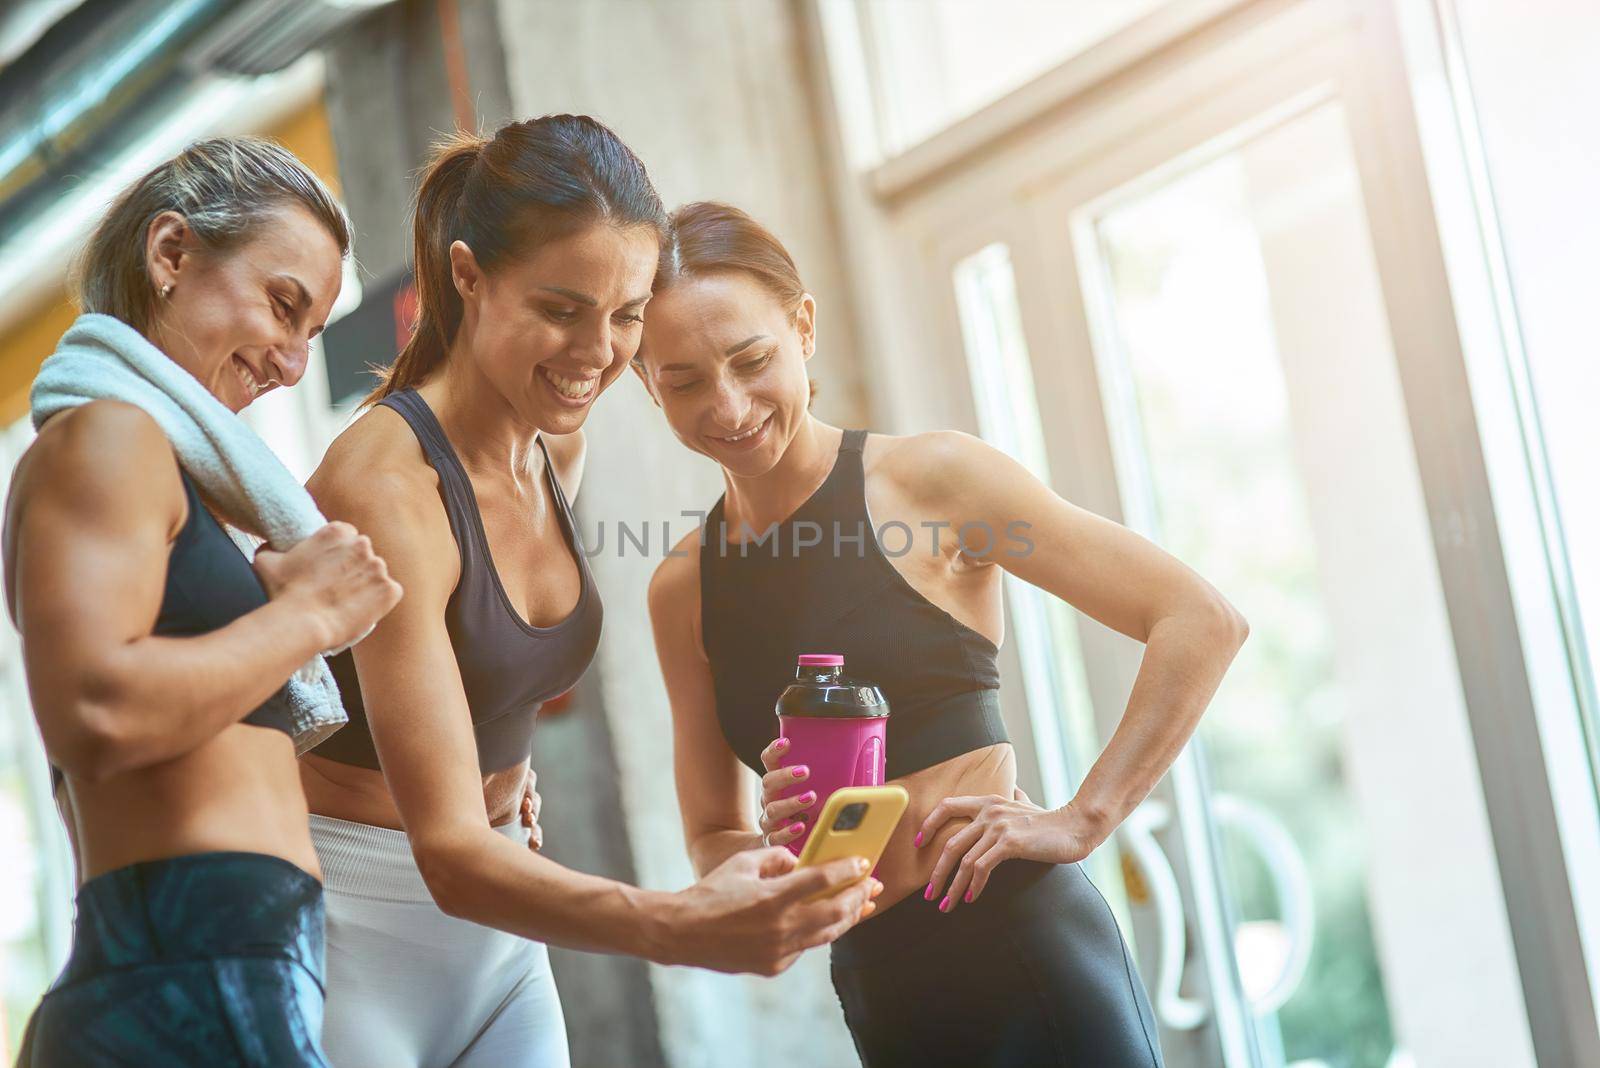 Group of three young beautiful and happy sportive women taking selfie on smartphone while resting after workout at gym, exercising together. Sport, wellness and healthy lifestyle